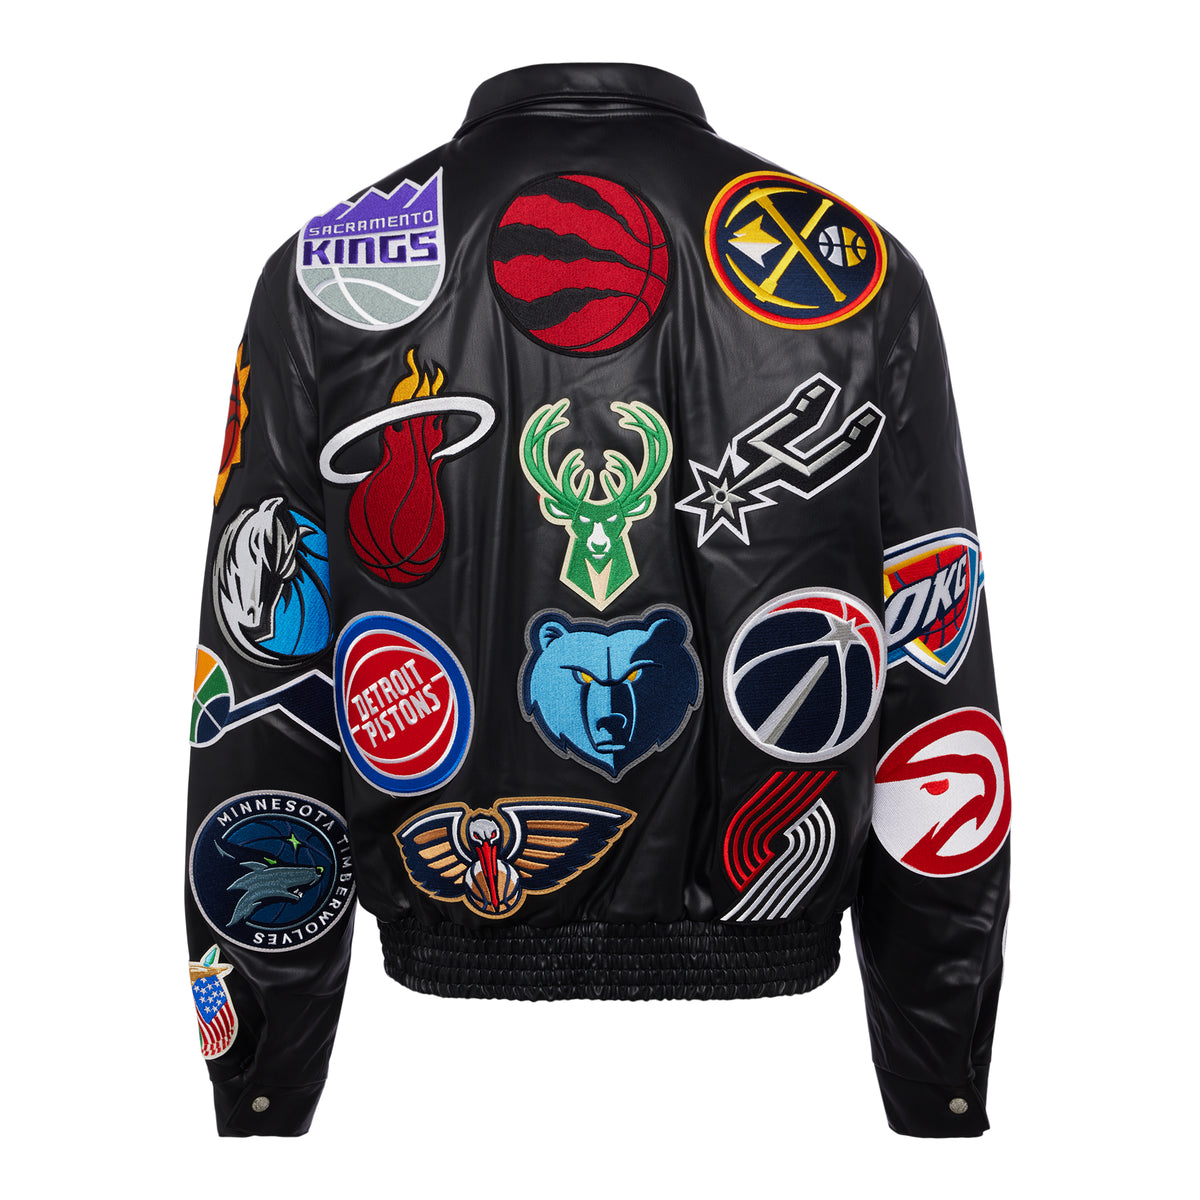 NBA COLLAGE VEGAN LEATHER JACKET Black with Color